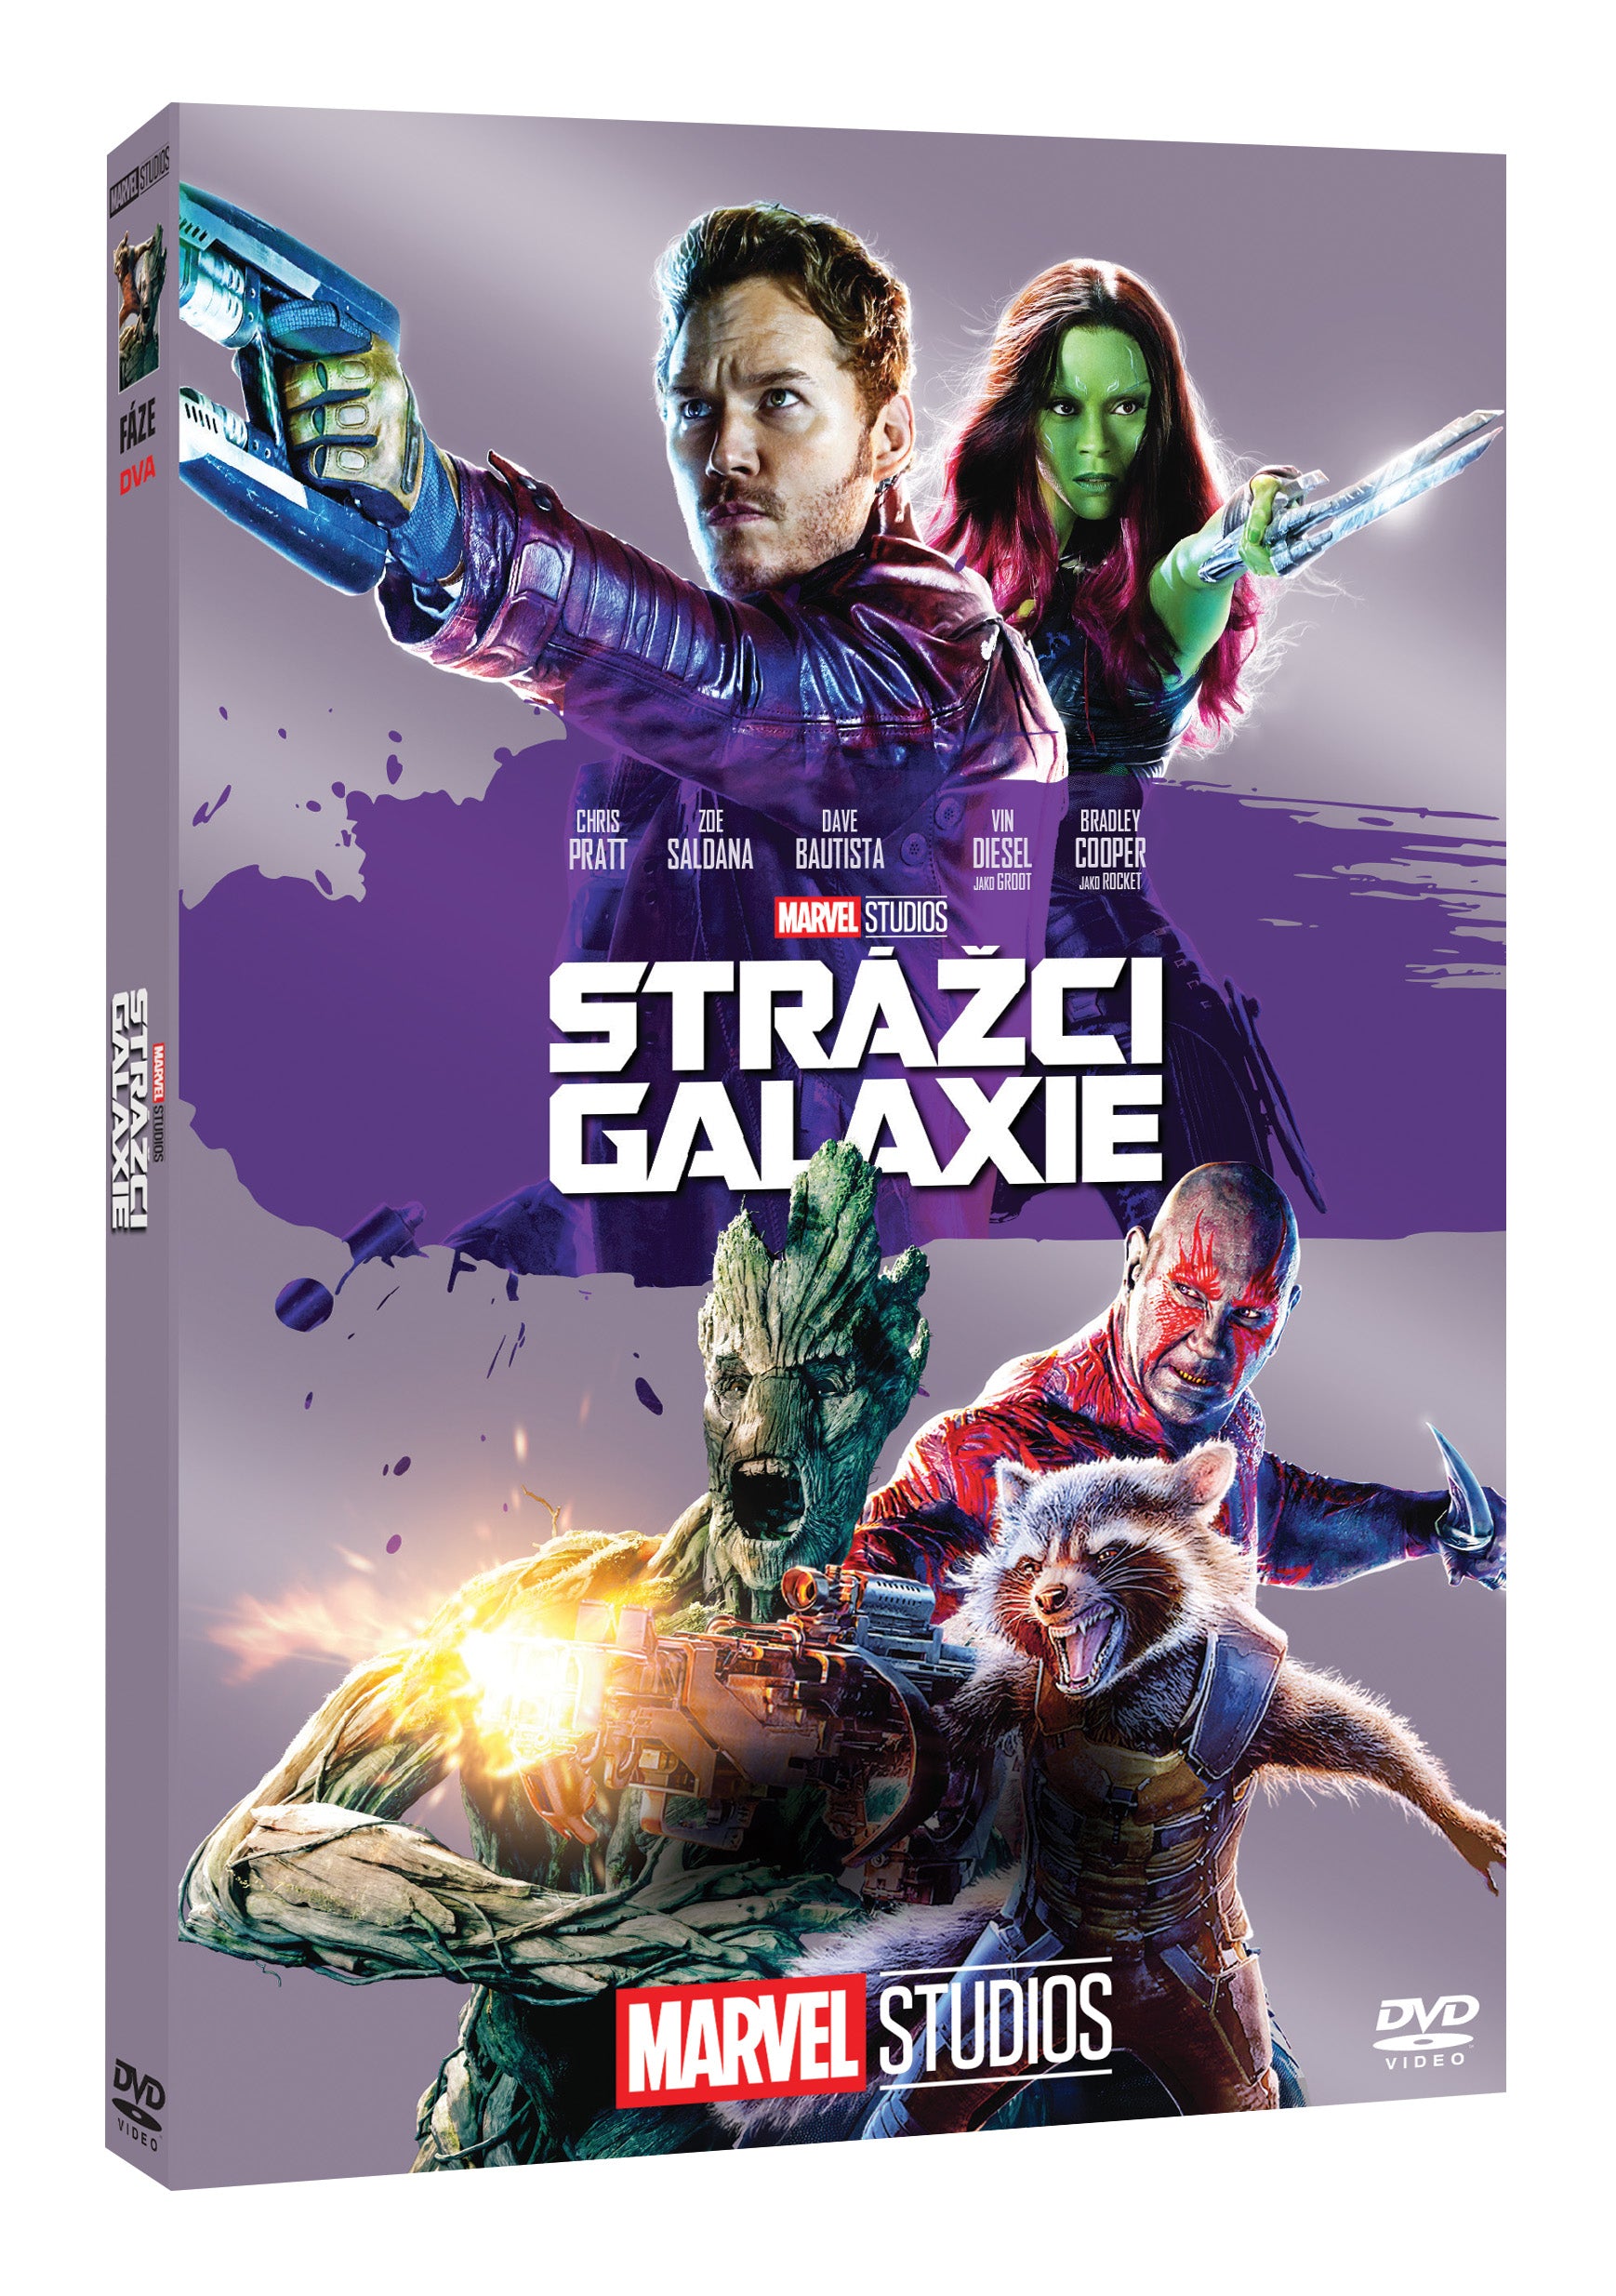 Strazci Galaxie DVD - Edice Marvel 10 let / Guardians of the Galaxy